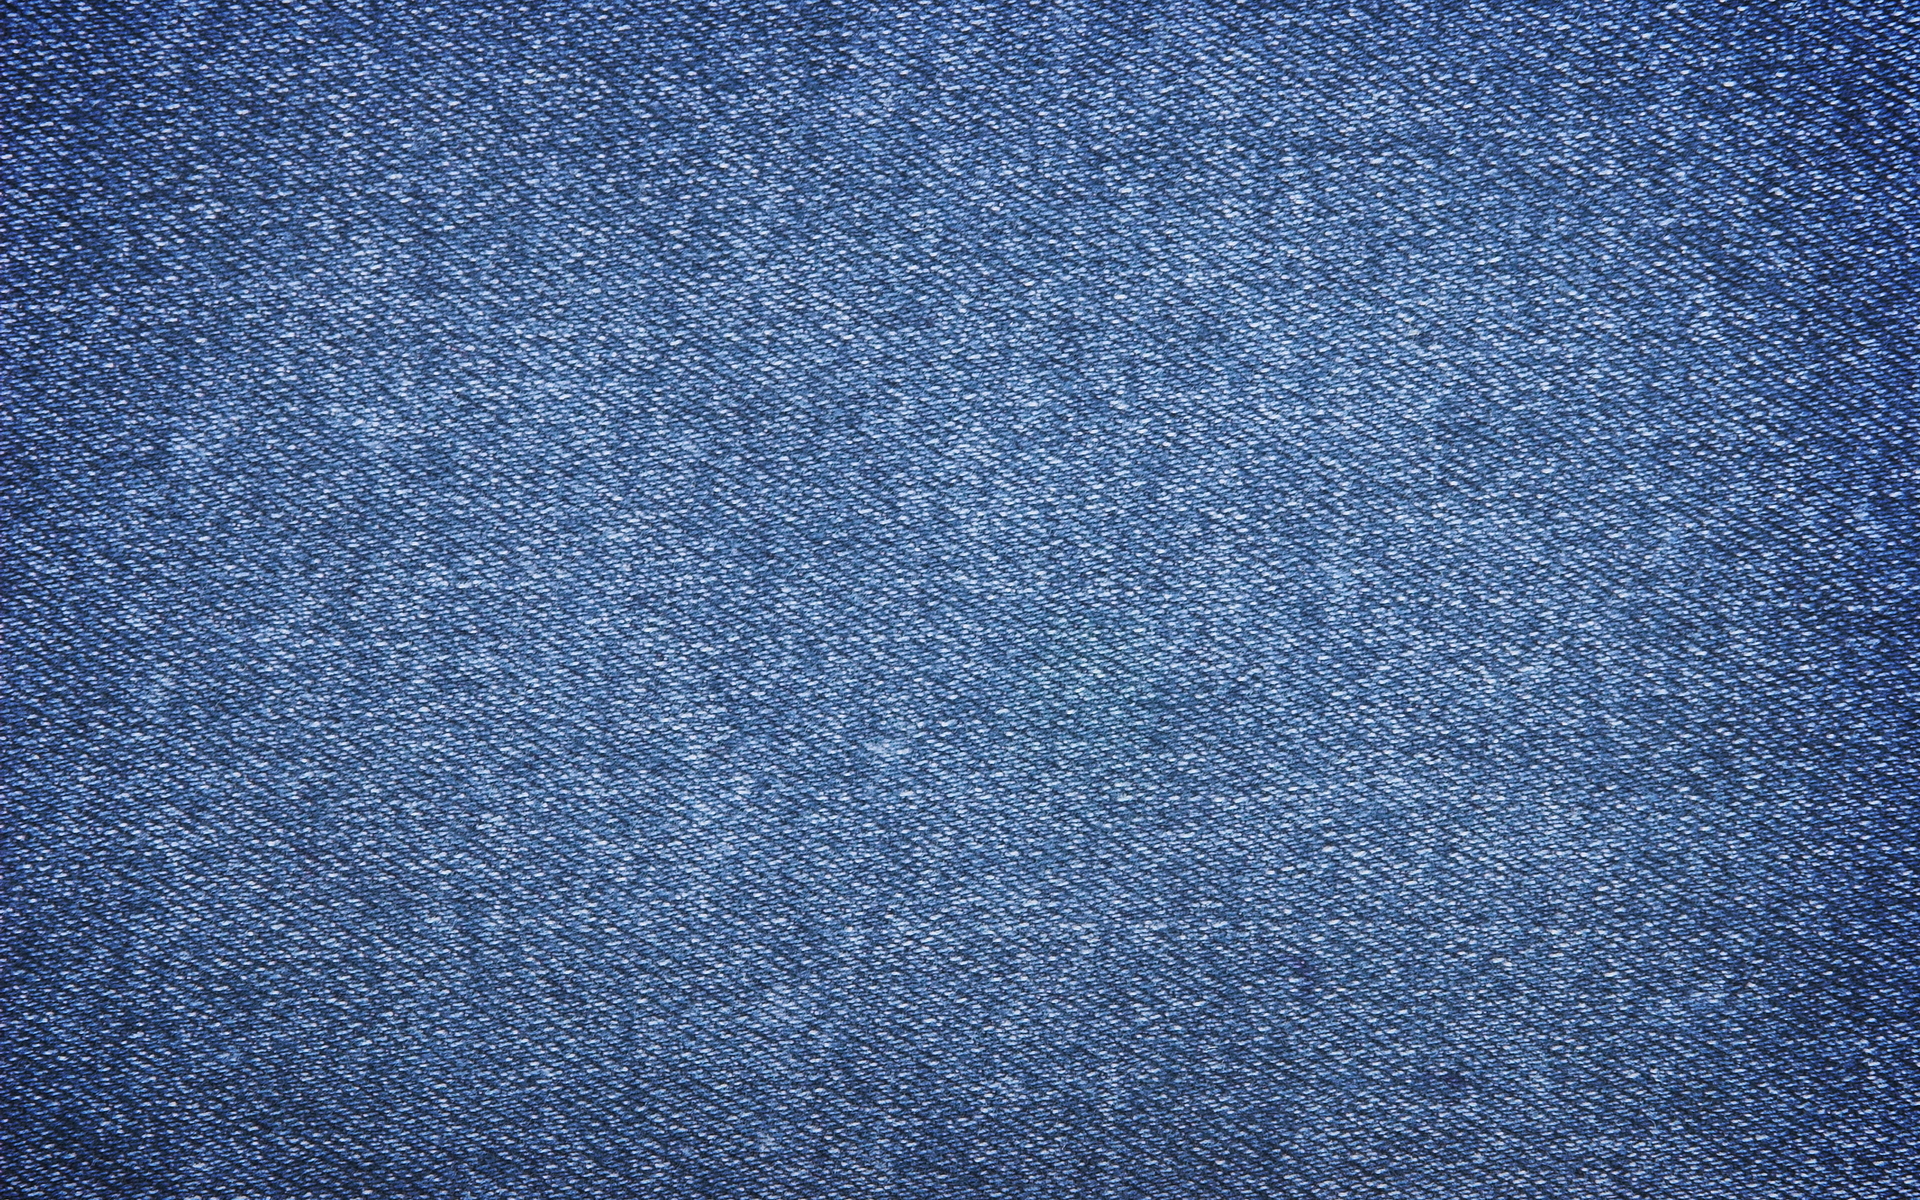 Texture Background Blue Jeans Fabric Material Wallpaper